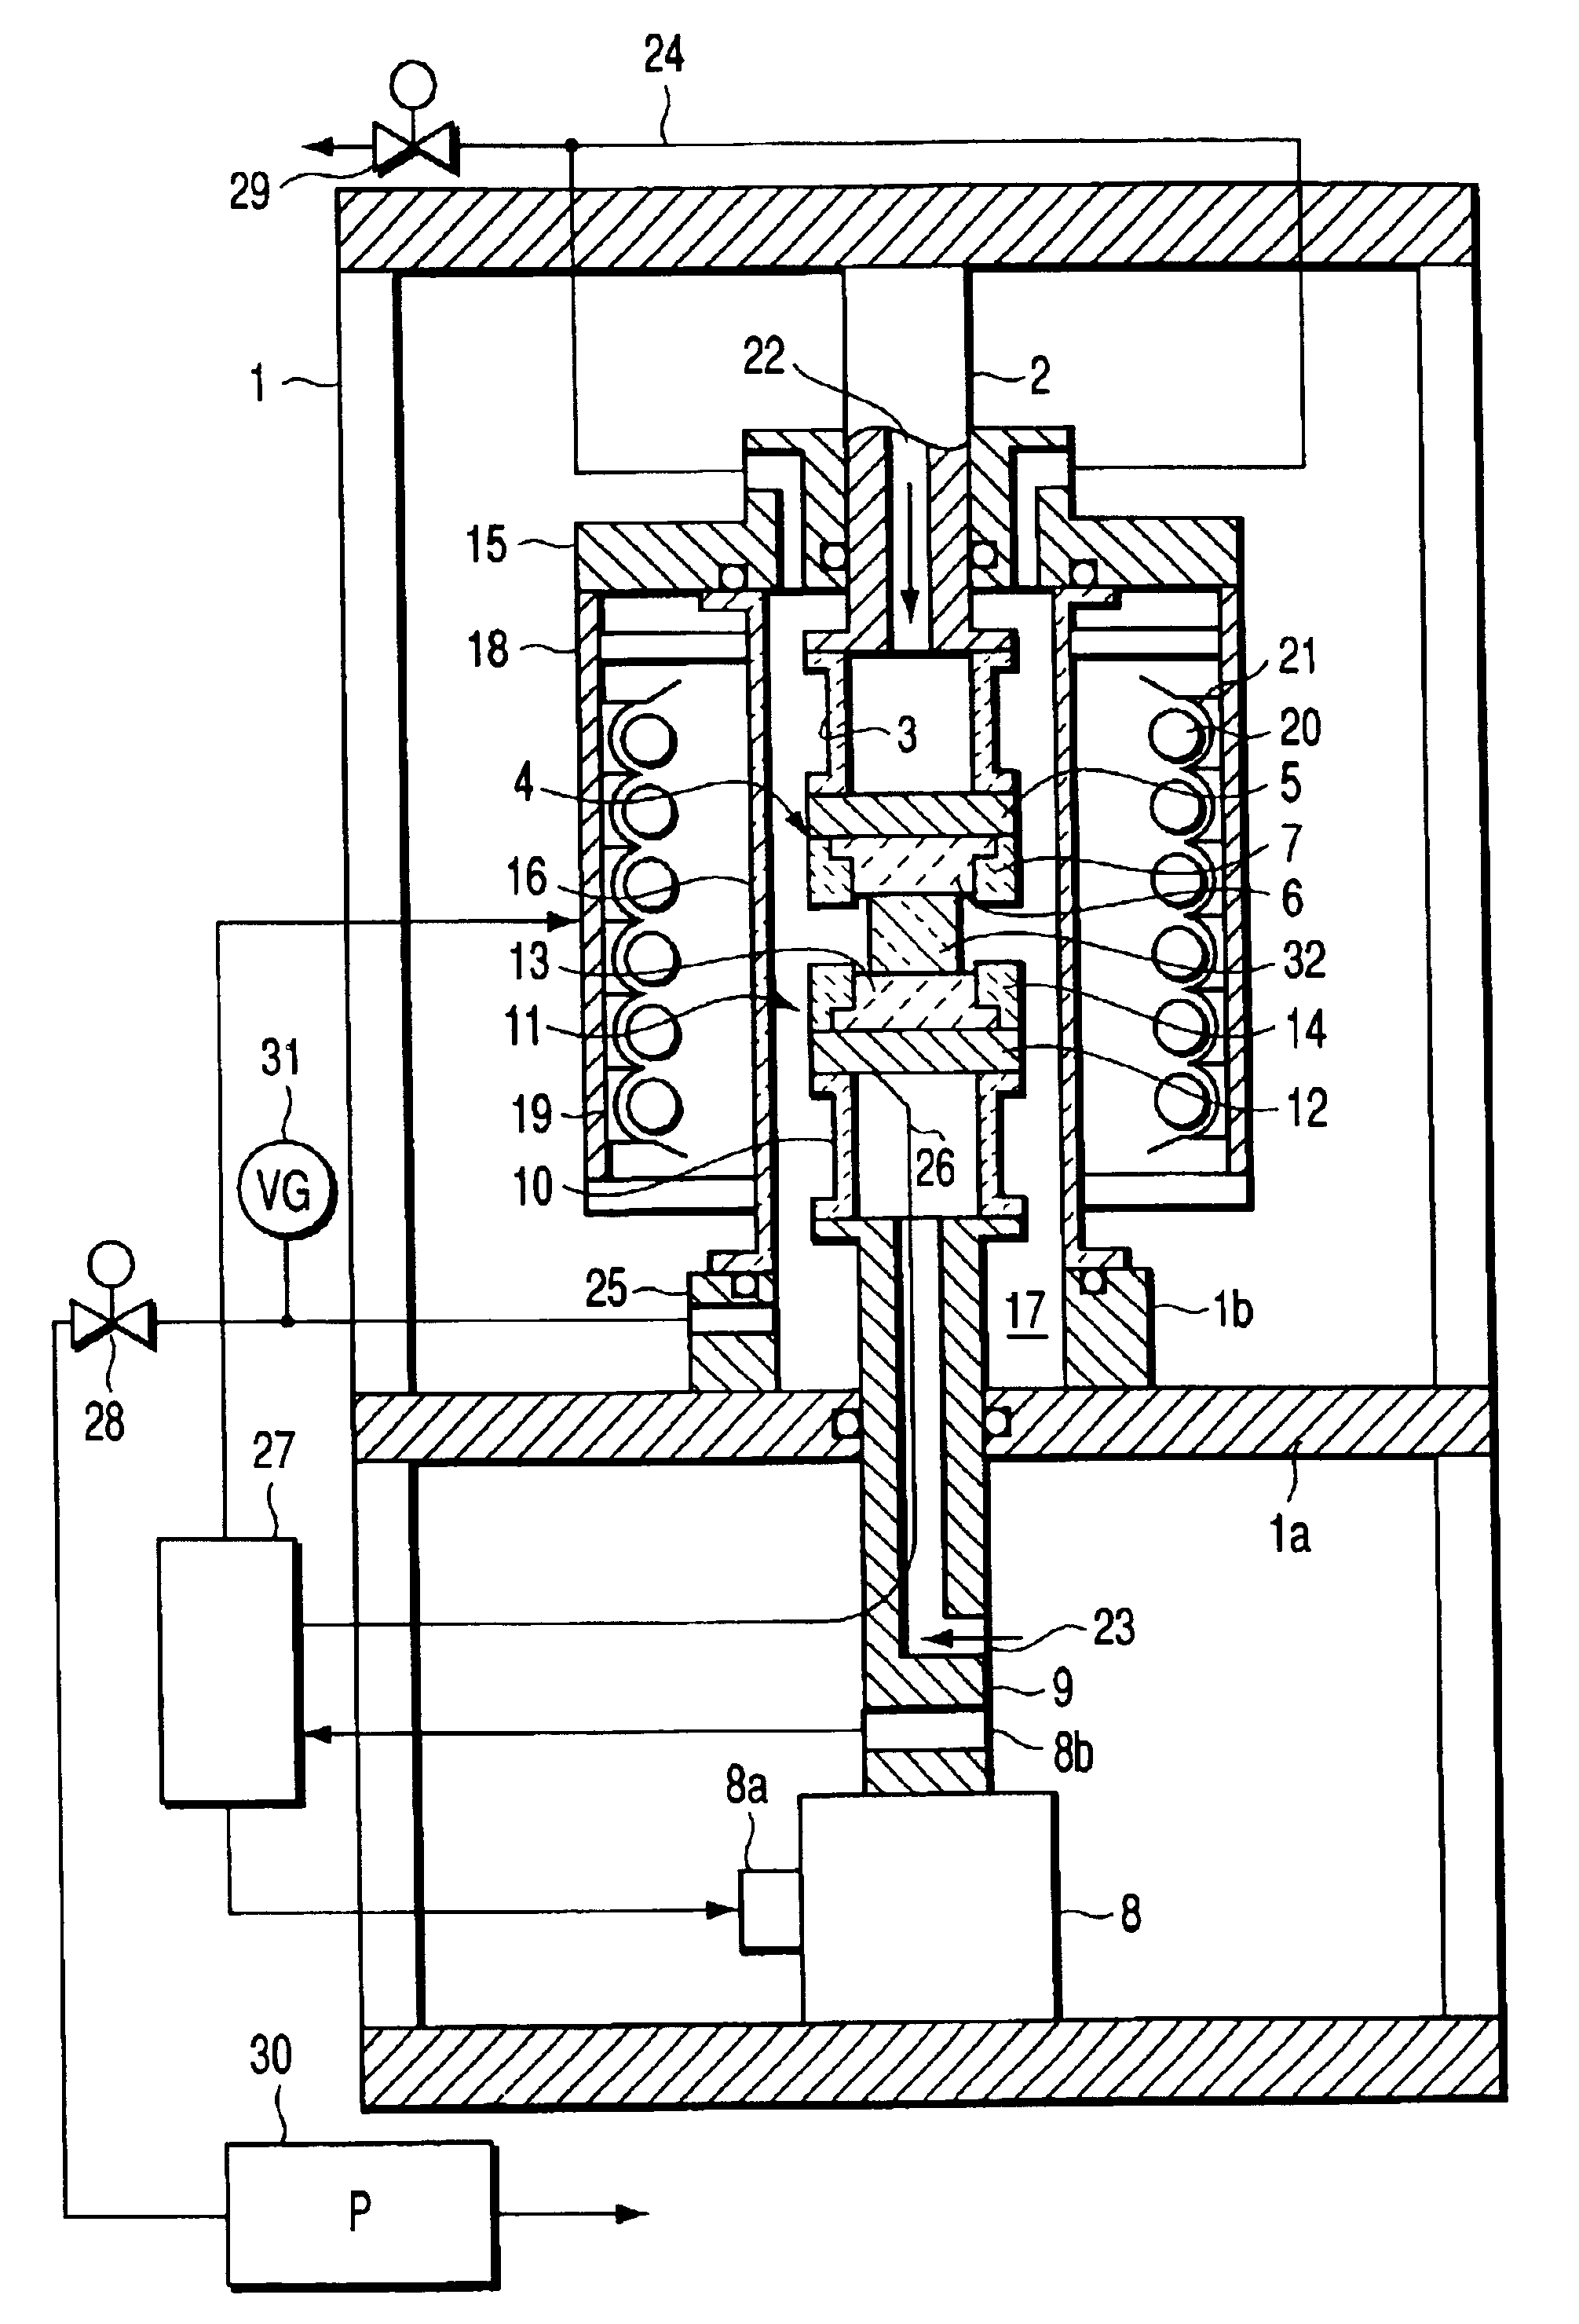 Apparatus and method for forming silica glass elements